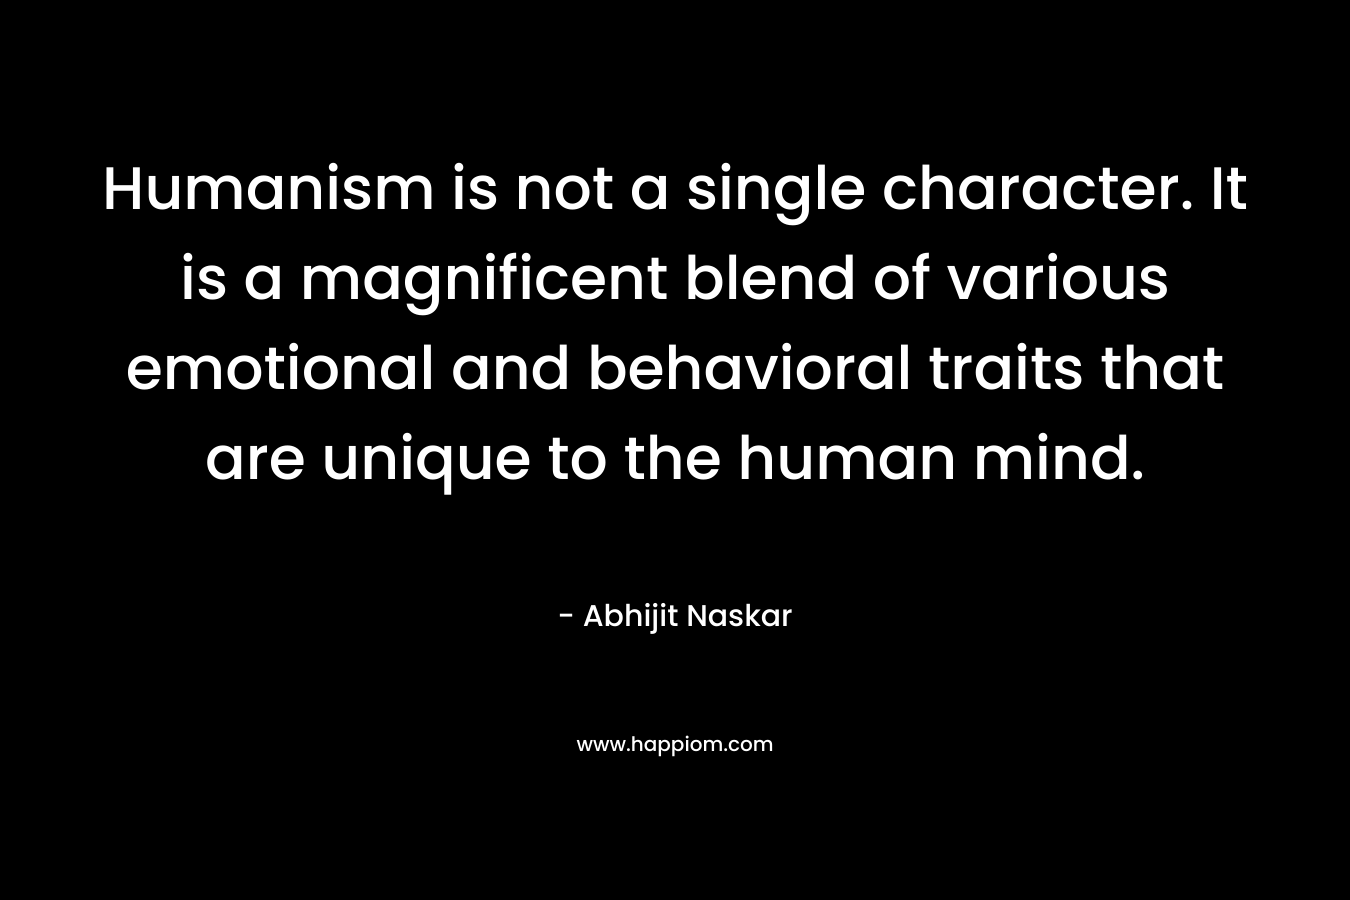 Humanism is not a single character. It is a magnificent blend of various emotional and behavioral traits that are unique to the human mind.